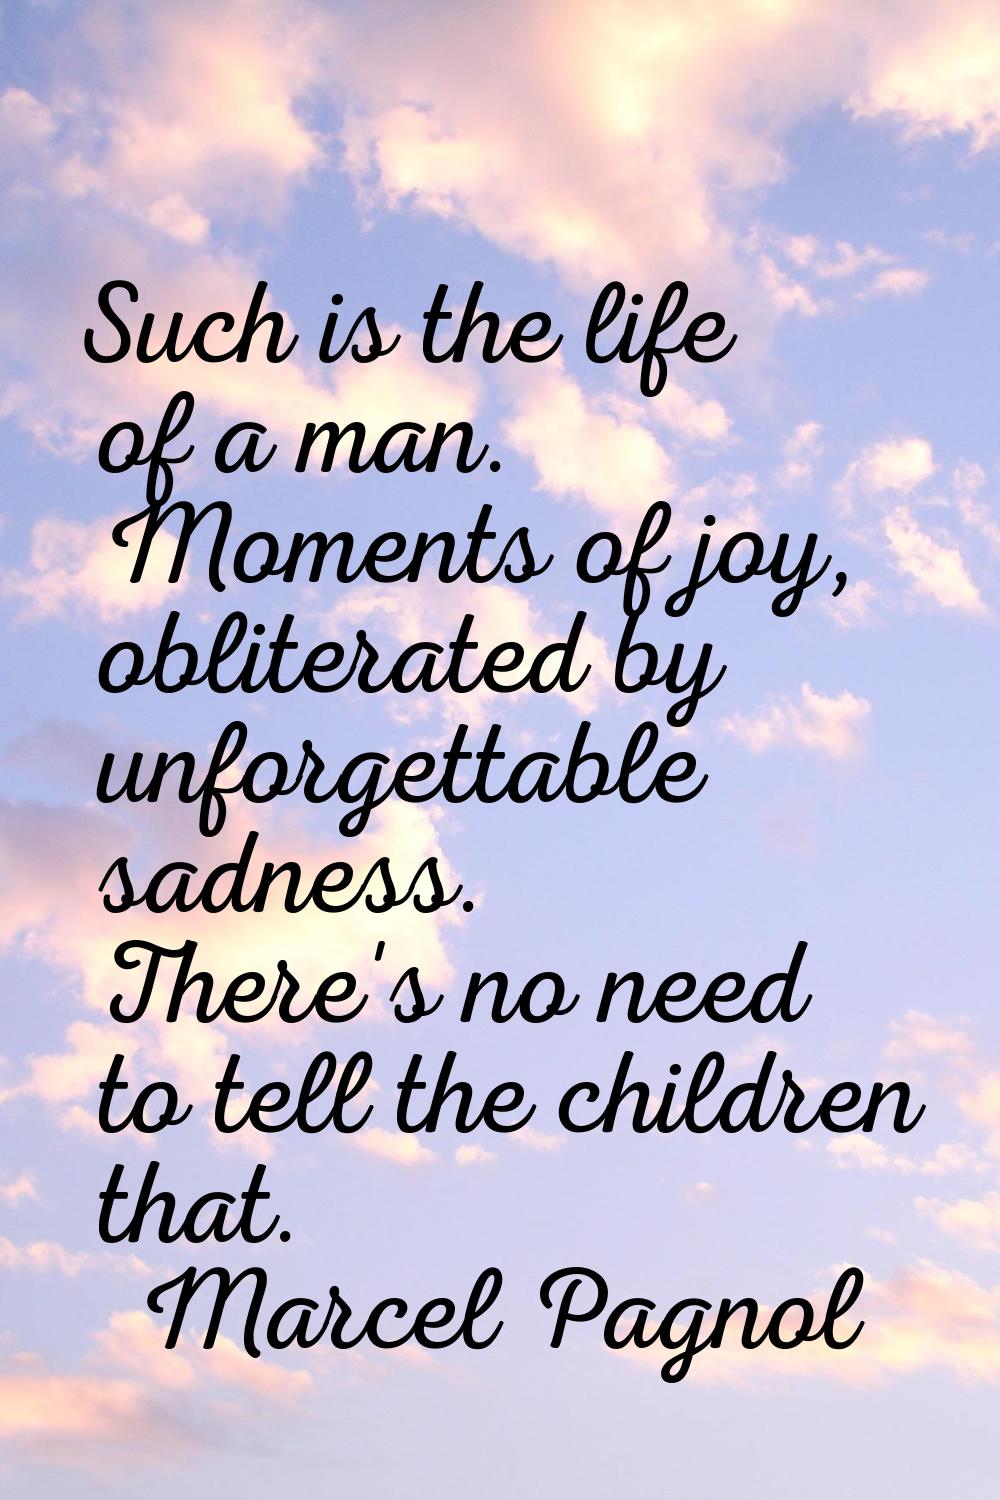 Such is the life of a man. Moments of joy, obliterated by unforgettable sadness. There's no need to